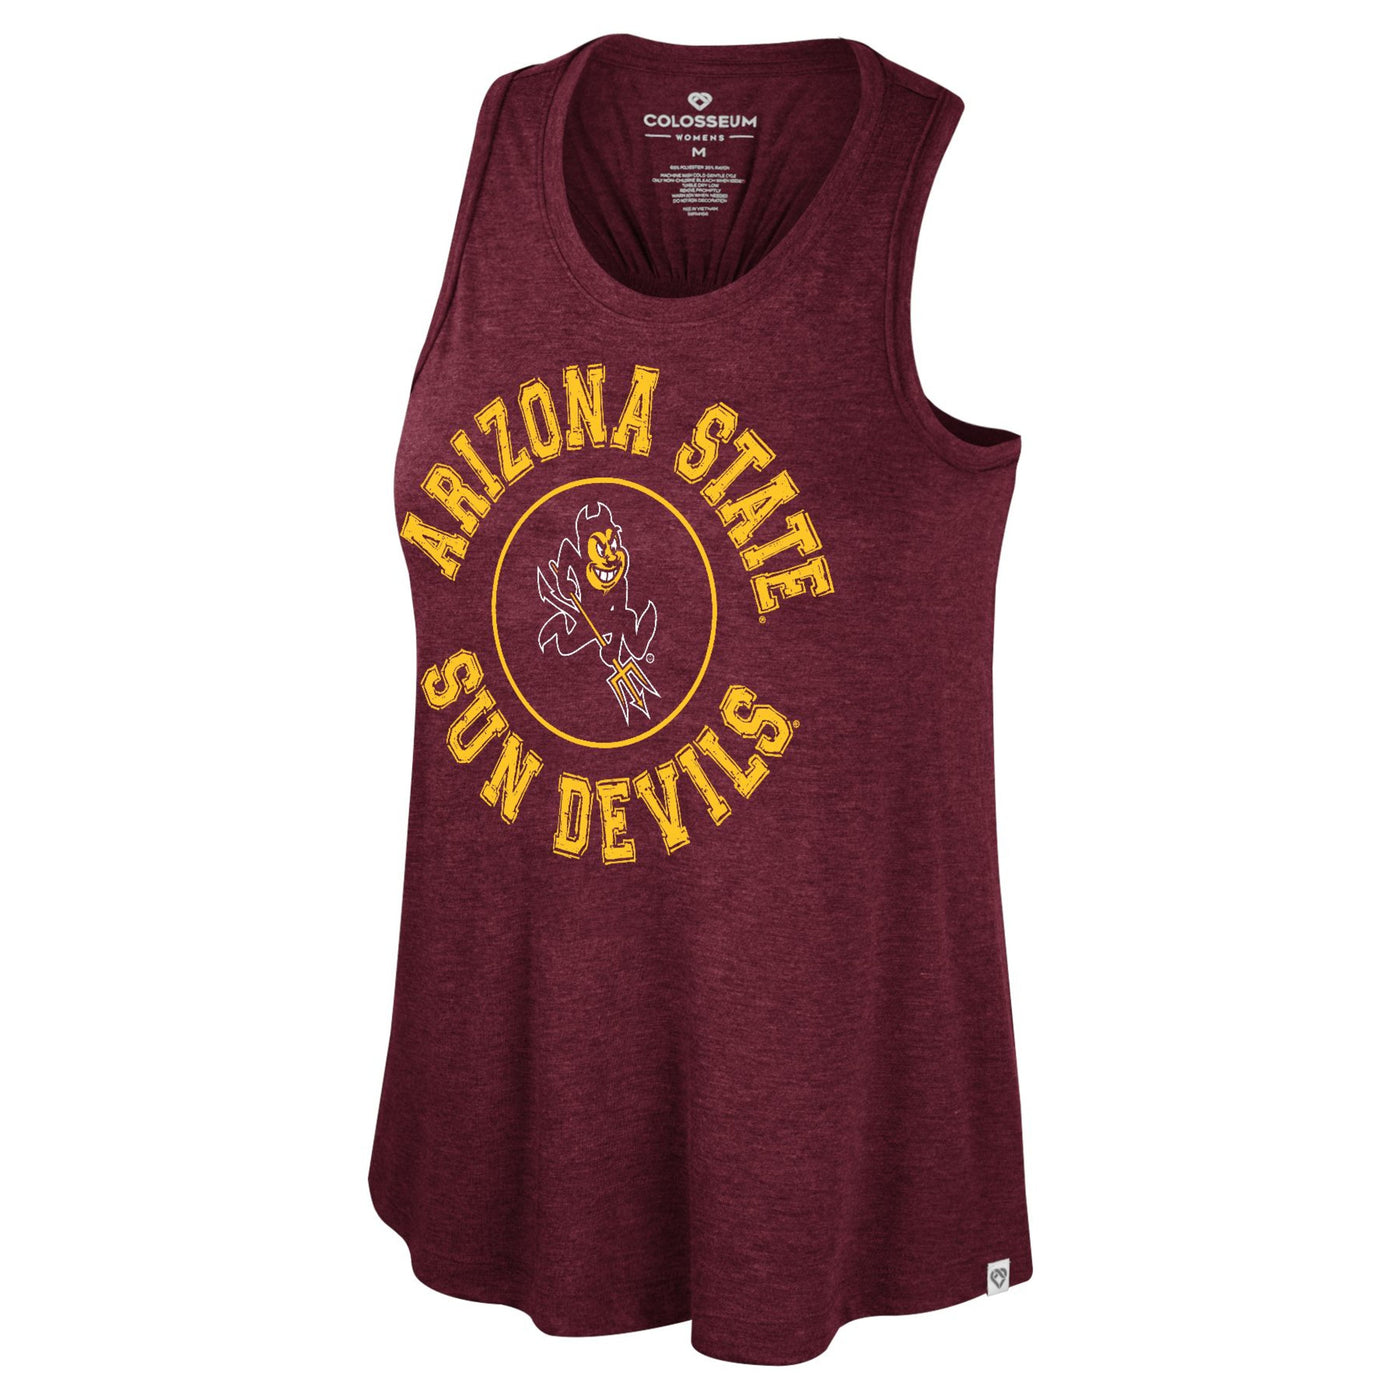 ASU maroon tank with gold text 